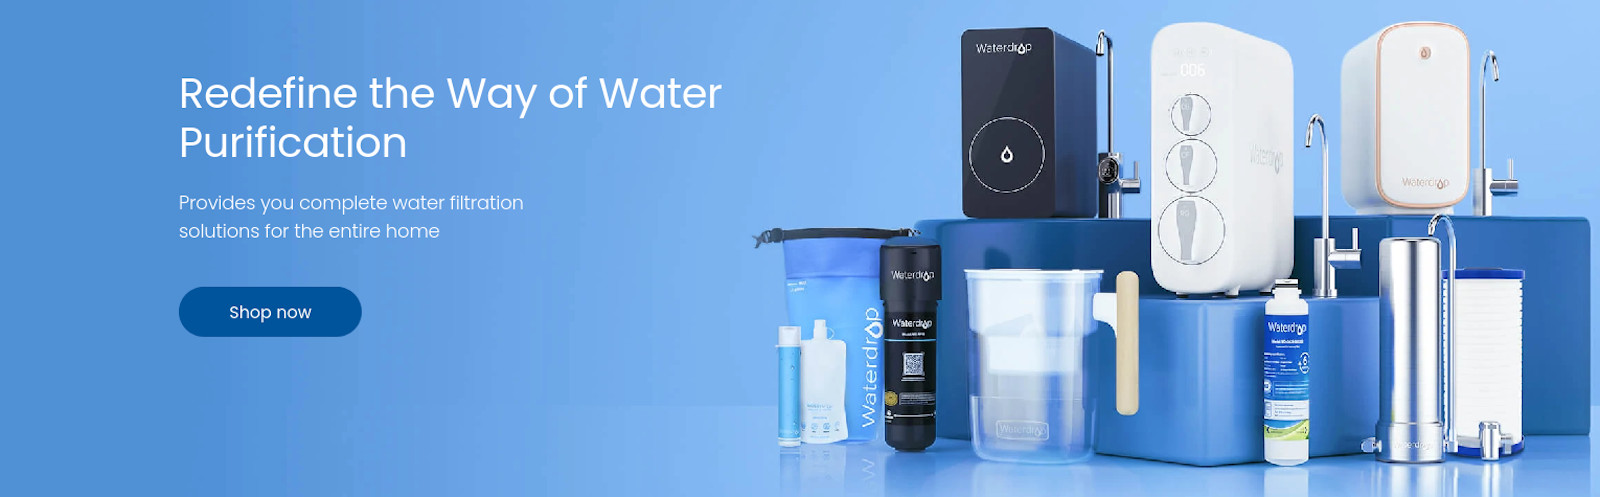 complete water filtration solutions bargains